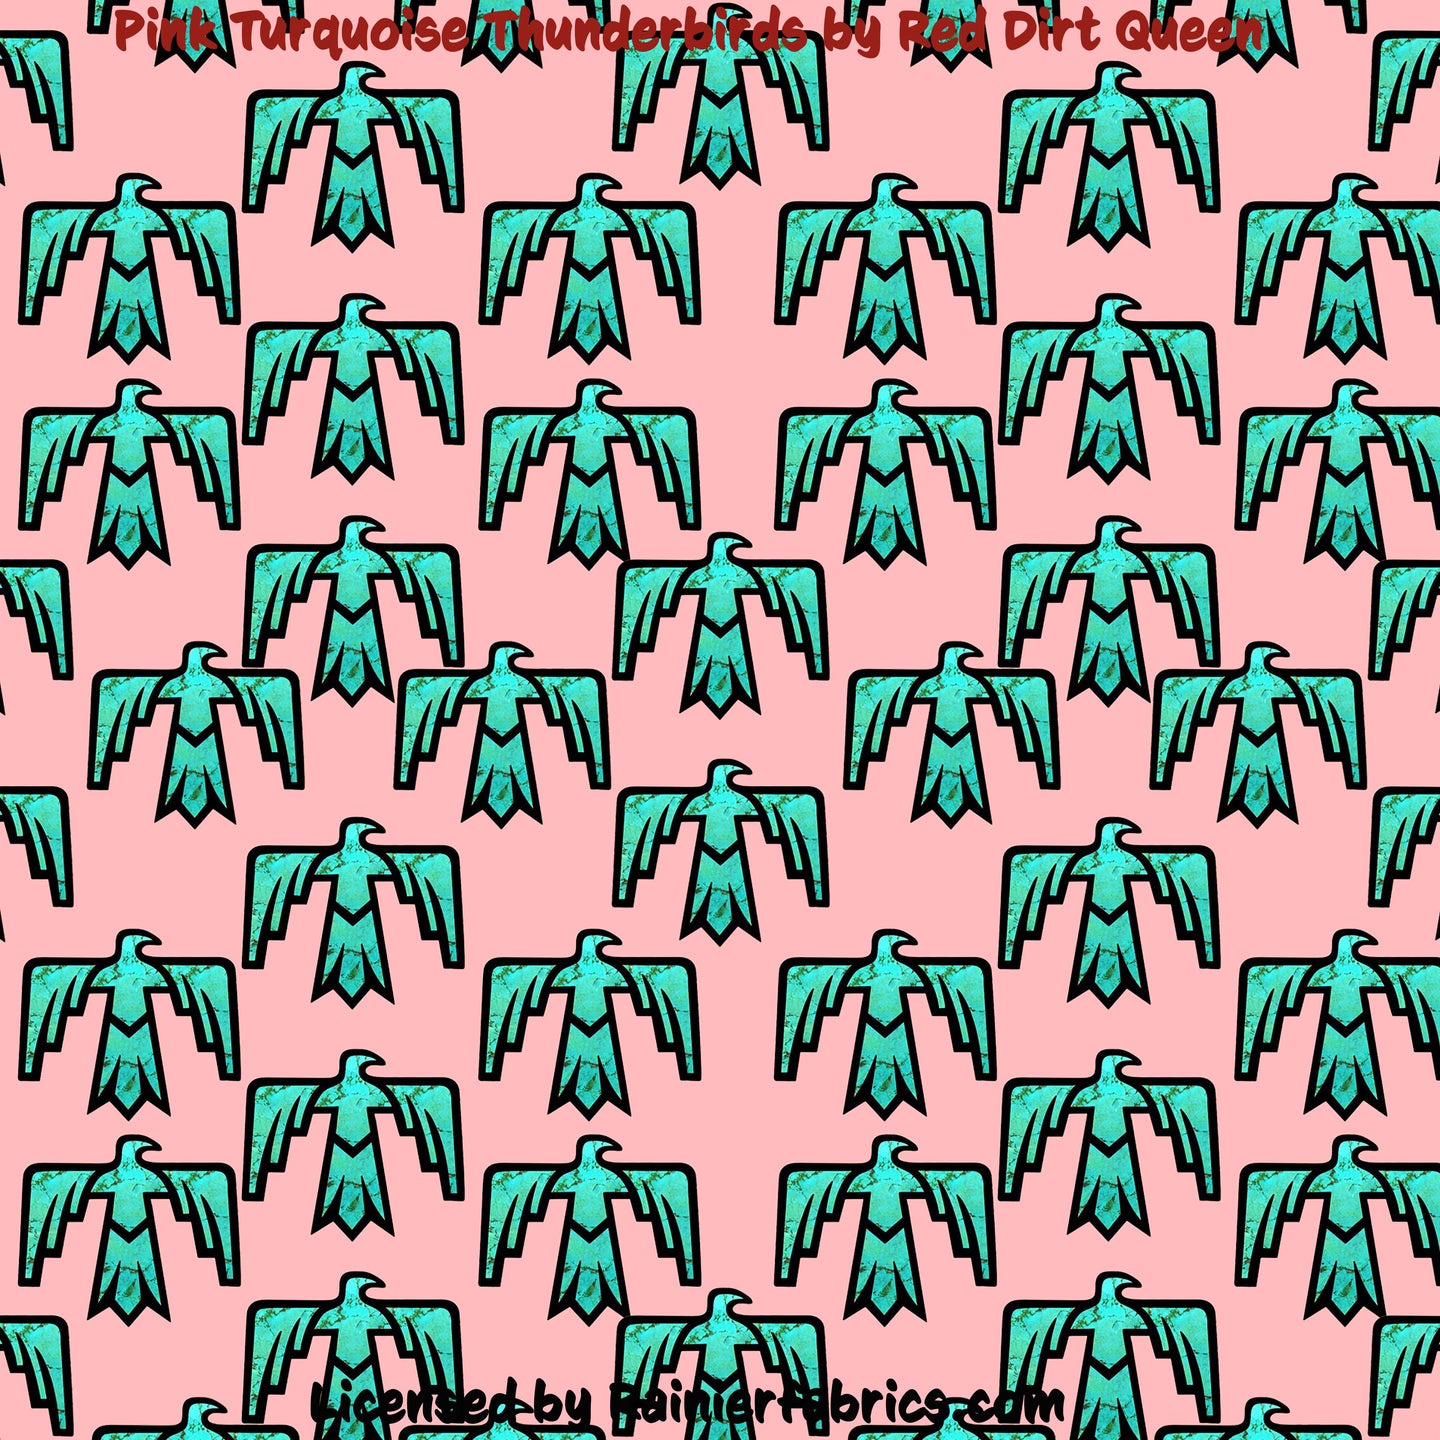 Pink Turquoise Thunderbirds by Red Dirt Queen- 2-5 day turnaround - Order by 1/2 yard; Description of bases below